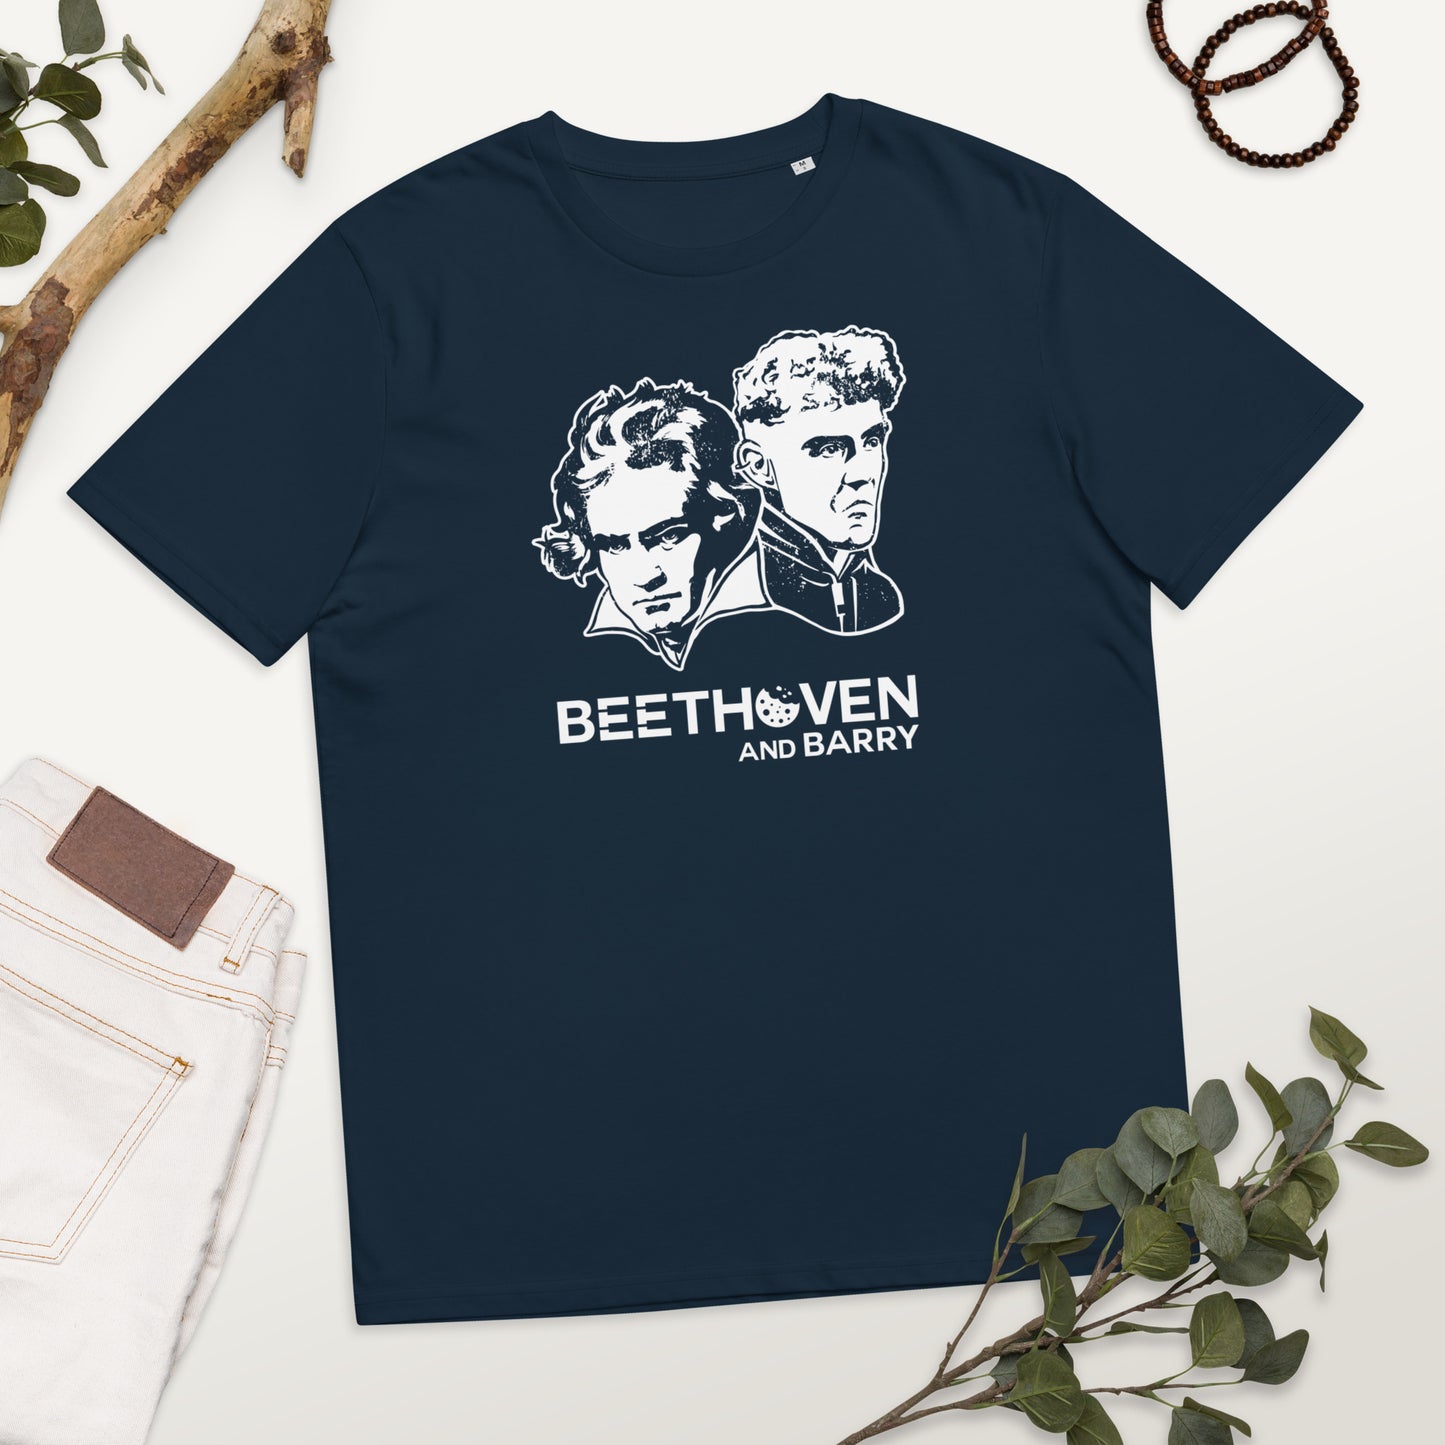 SWINES Live – Beethoven and Barry Sketch Tee (Adults)